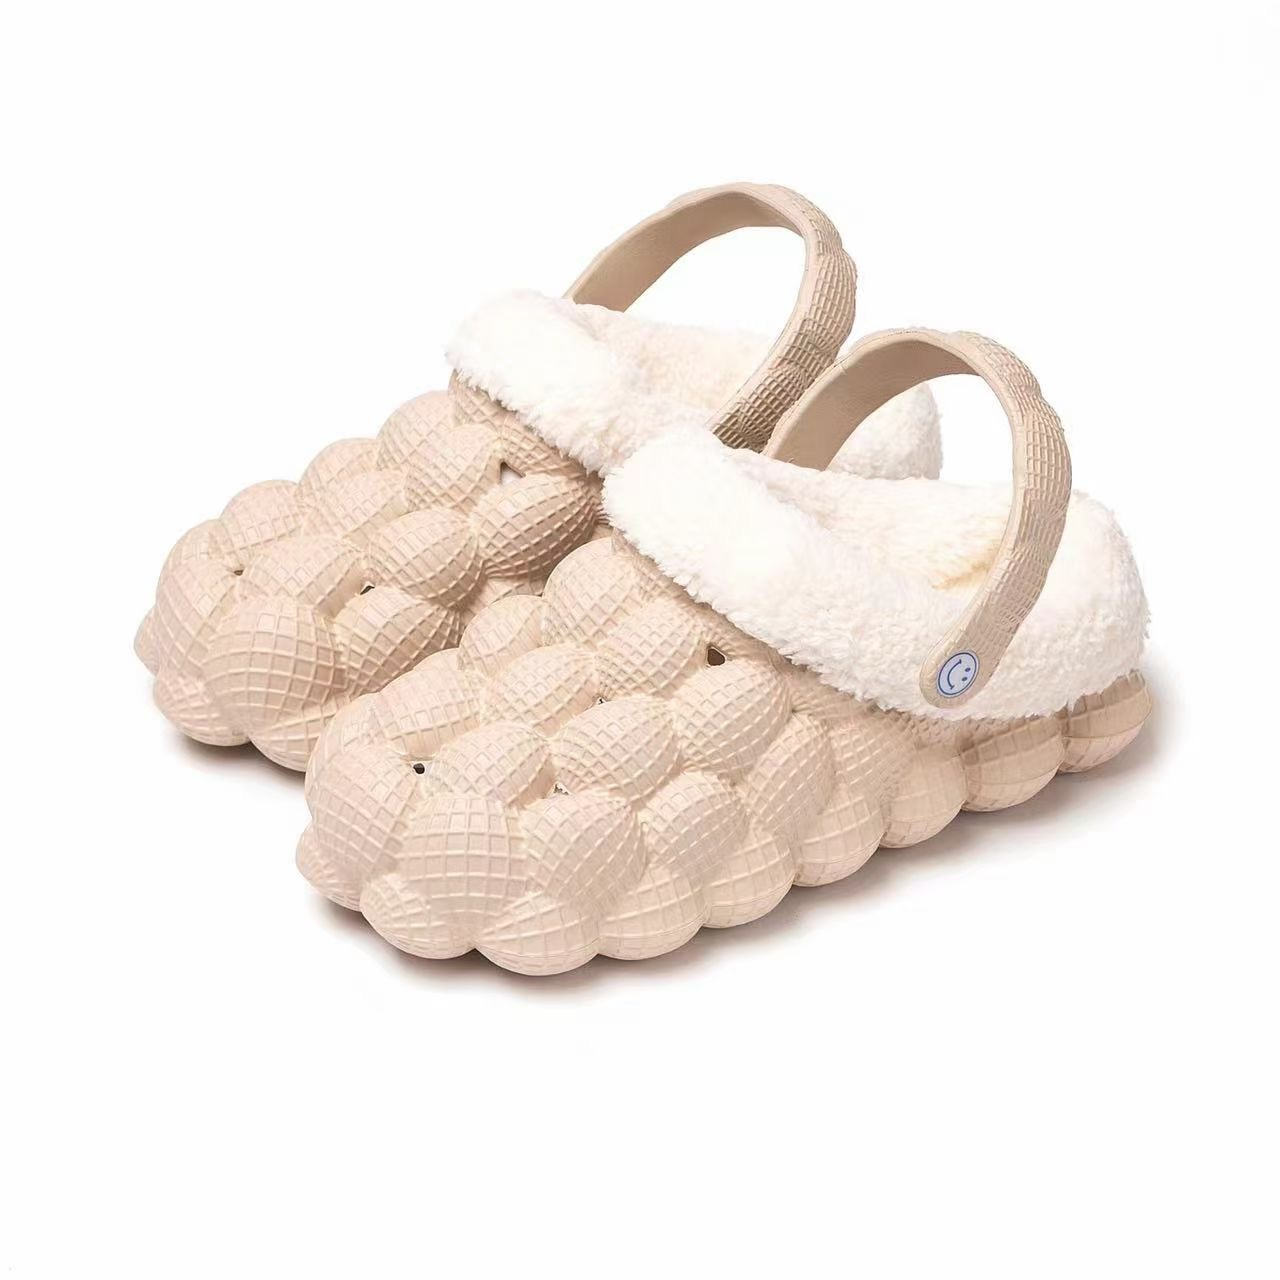 Comfortable Warm Cotton Slippers